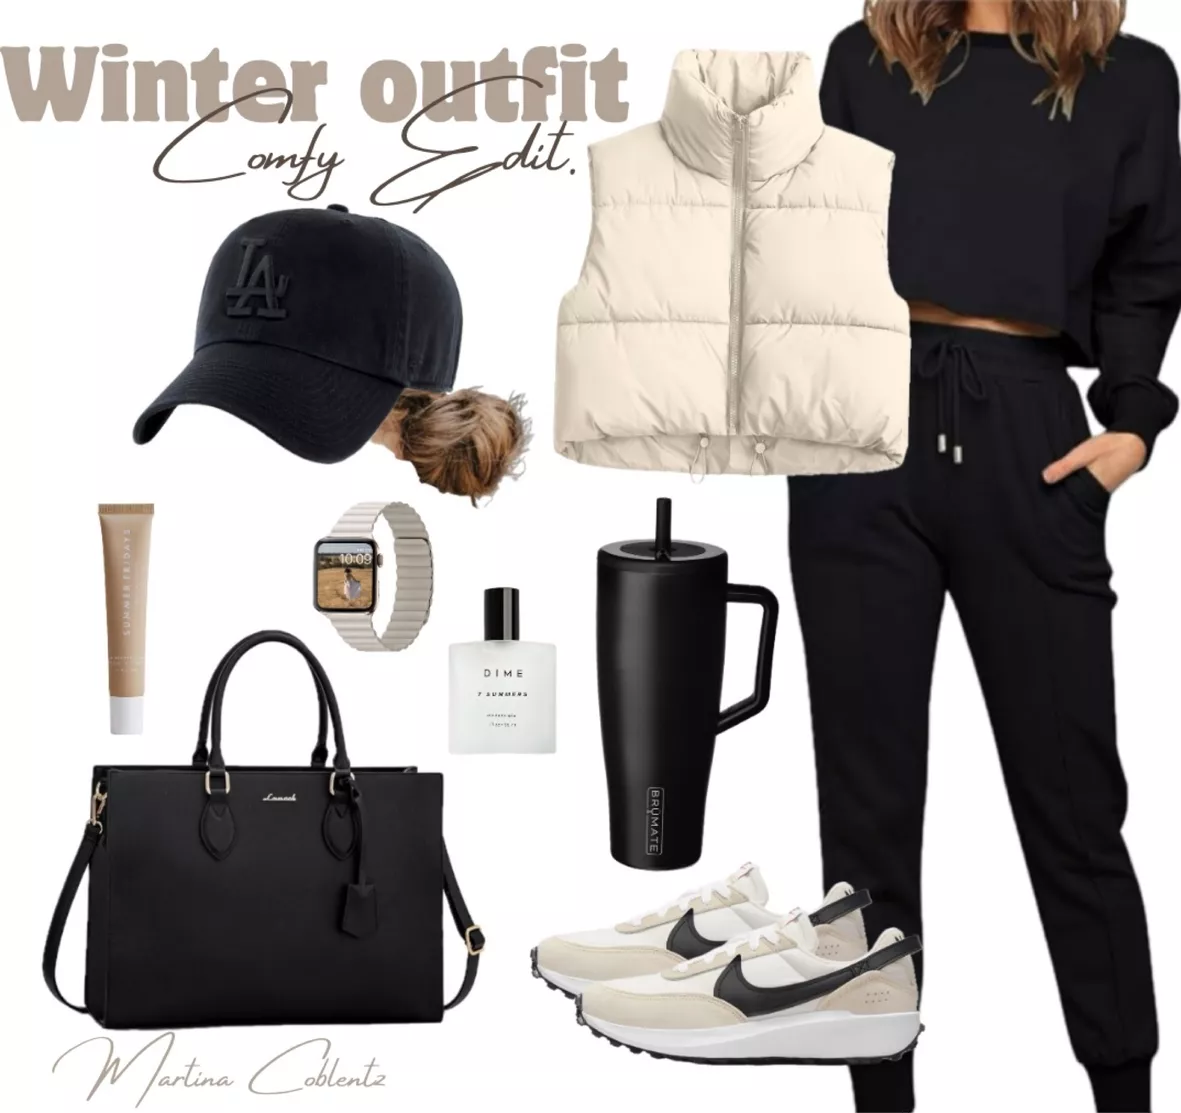 Pin by 𝕸𝖆𝖗𝖙𝖎𝖓𝖆 on WINTER